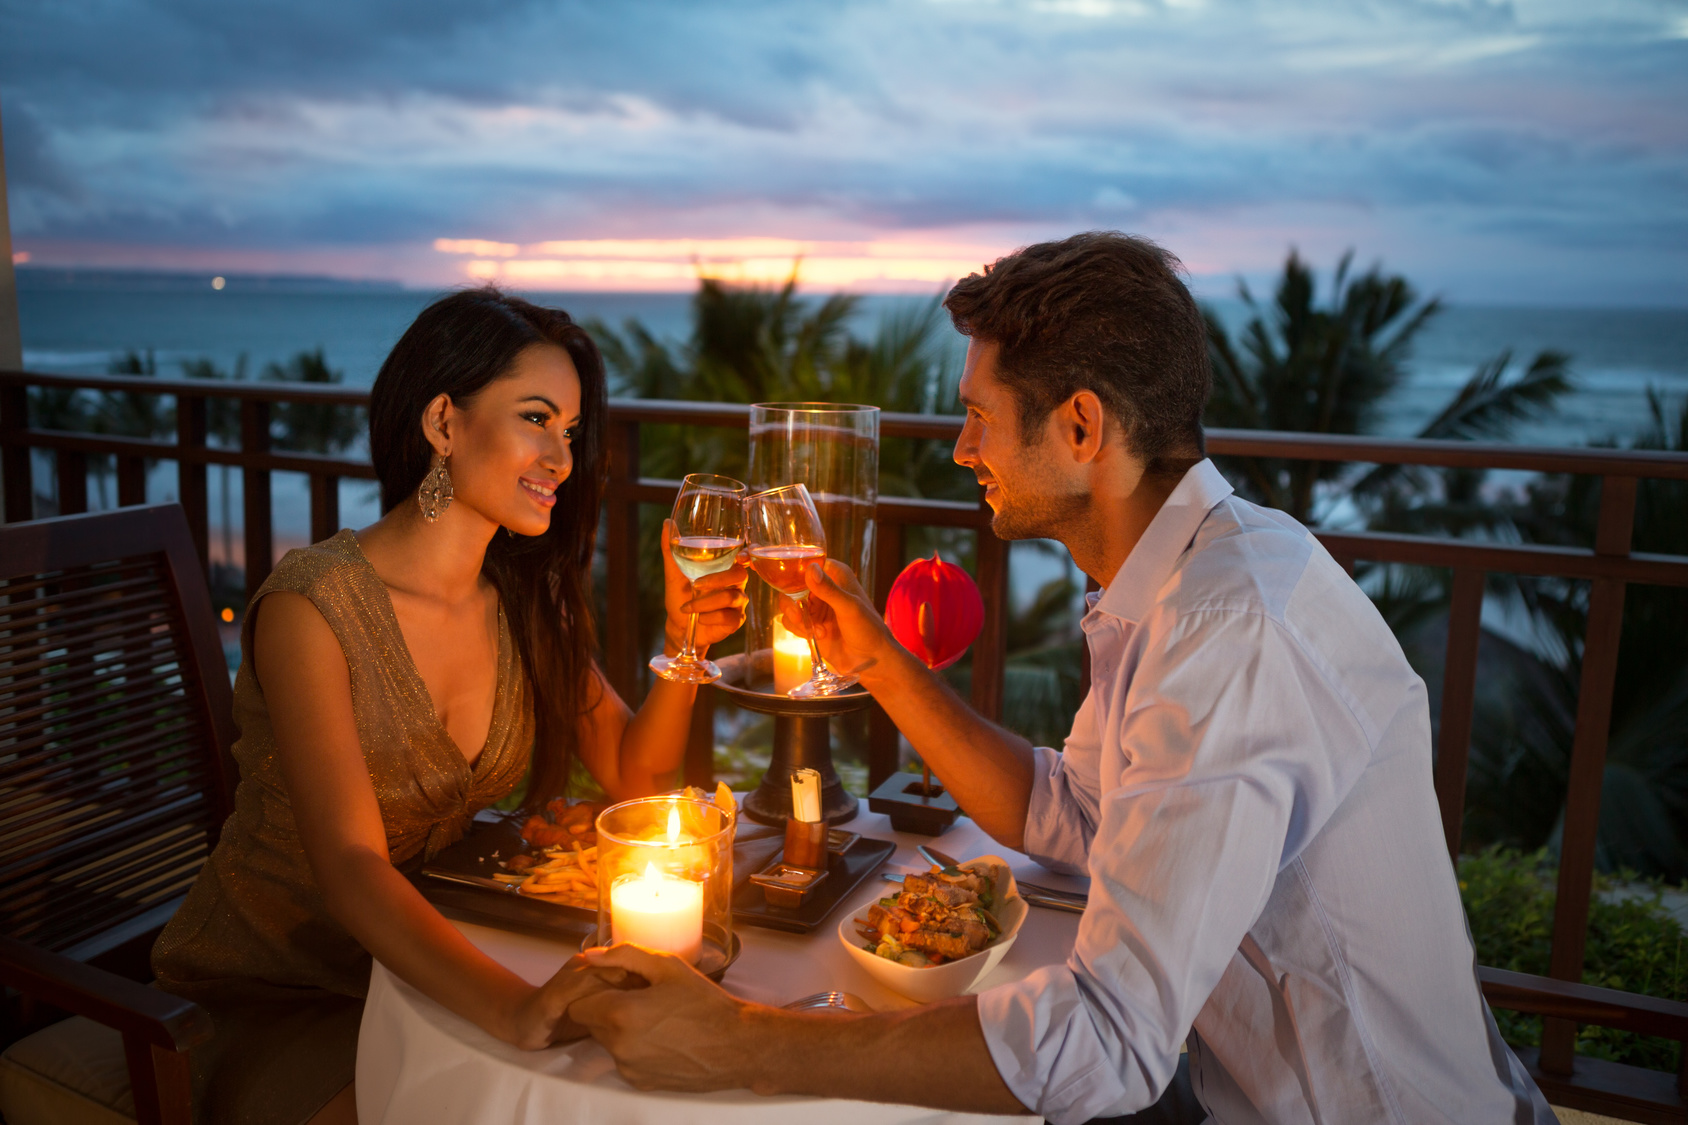 Romantic Wining and Dining.